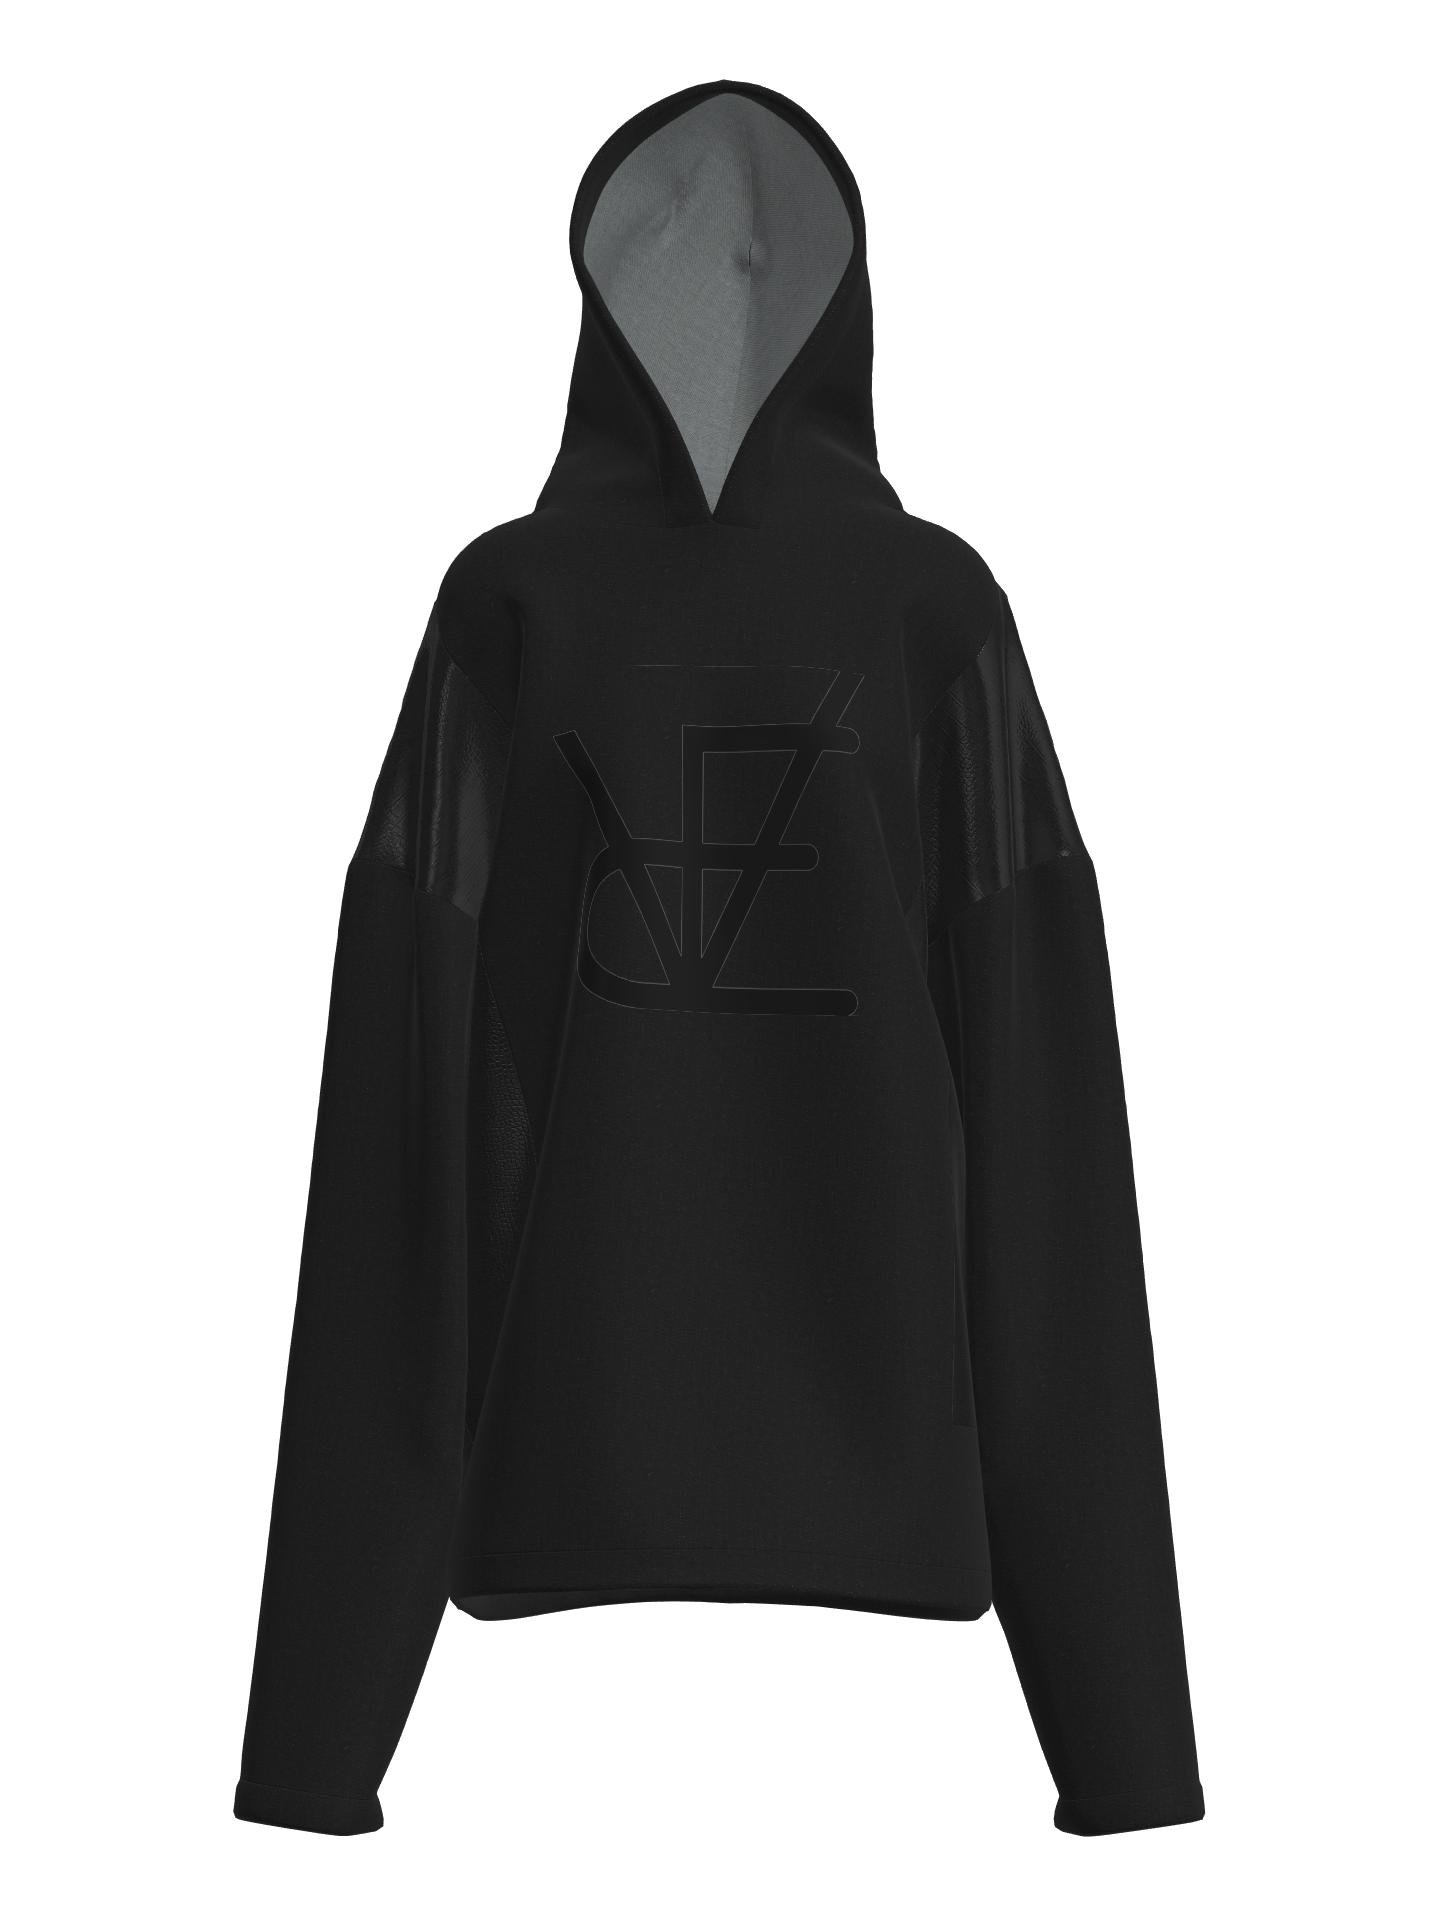 Maxi Logo Upcycled Hoodie by MAISON ADÉ